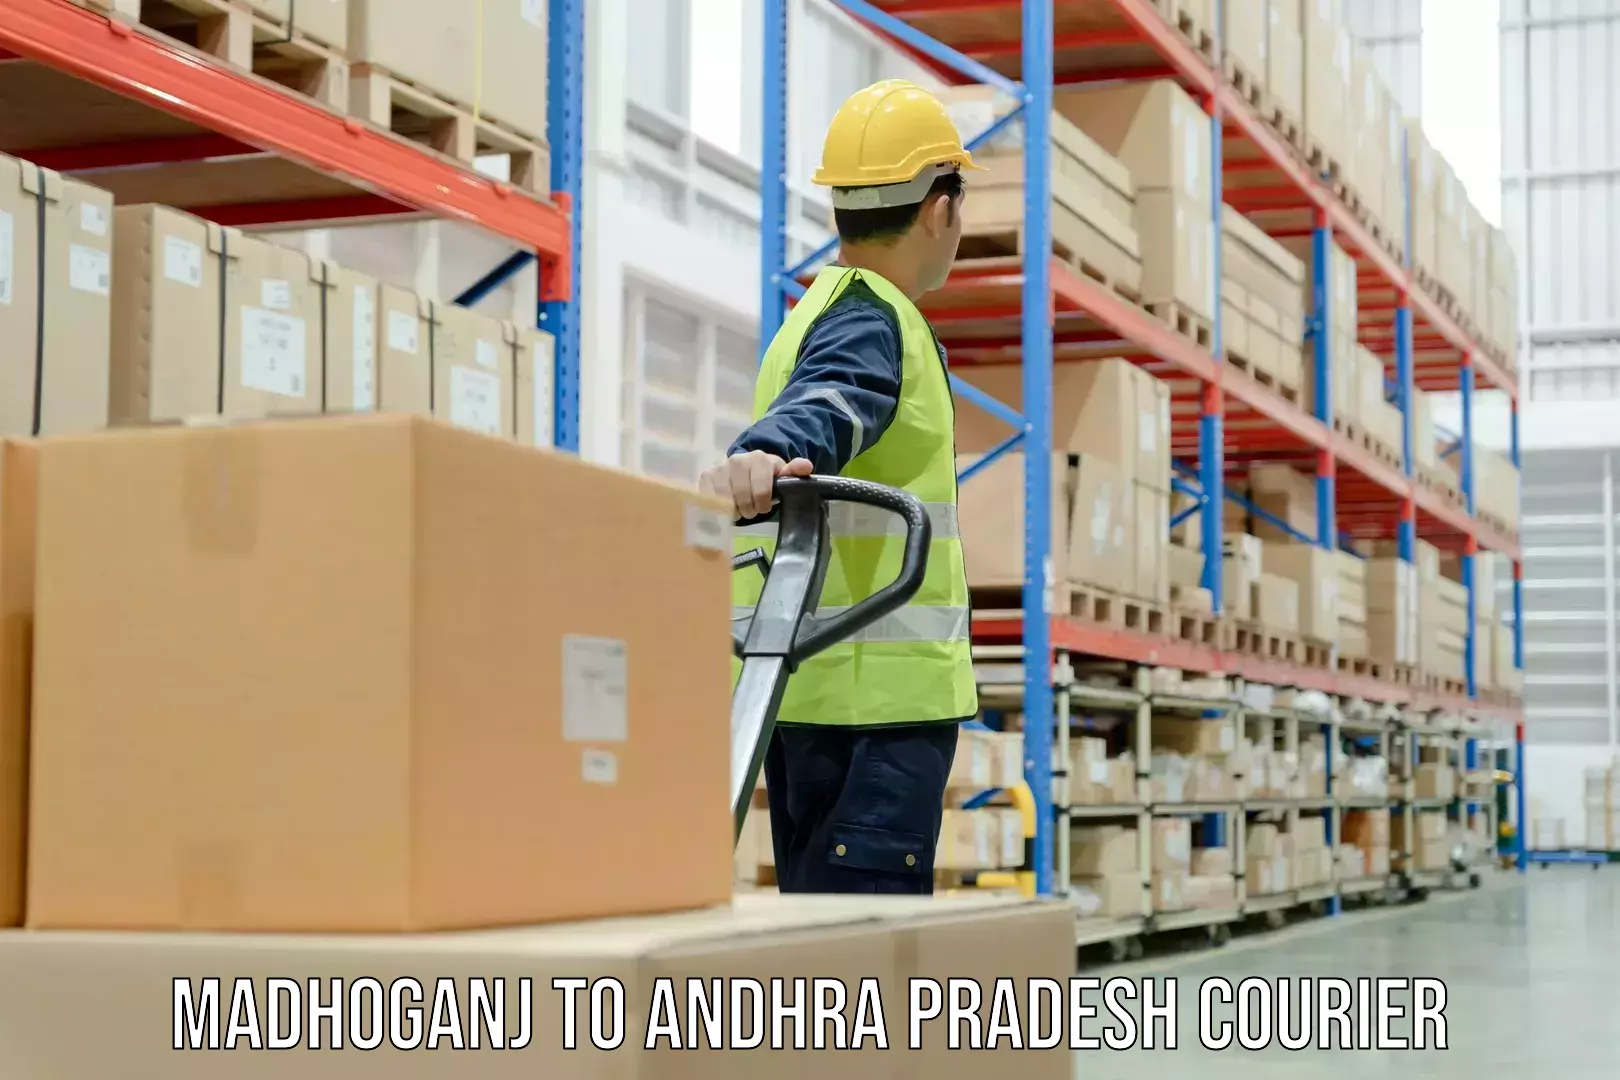 State-of-the-art courier technology Madhoganj to Giddalur